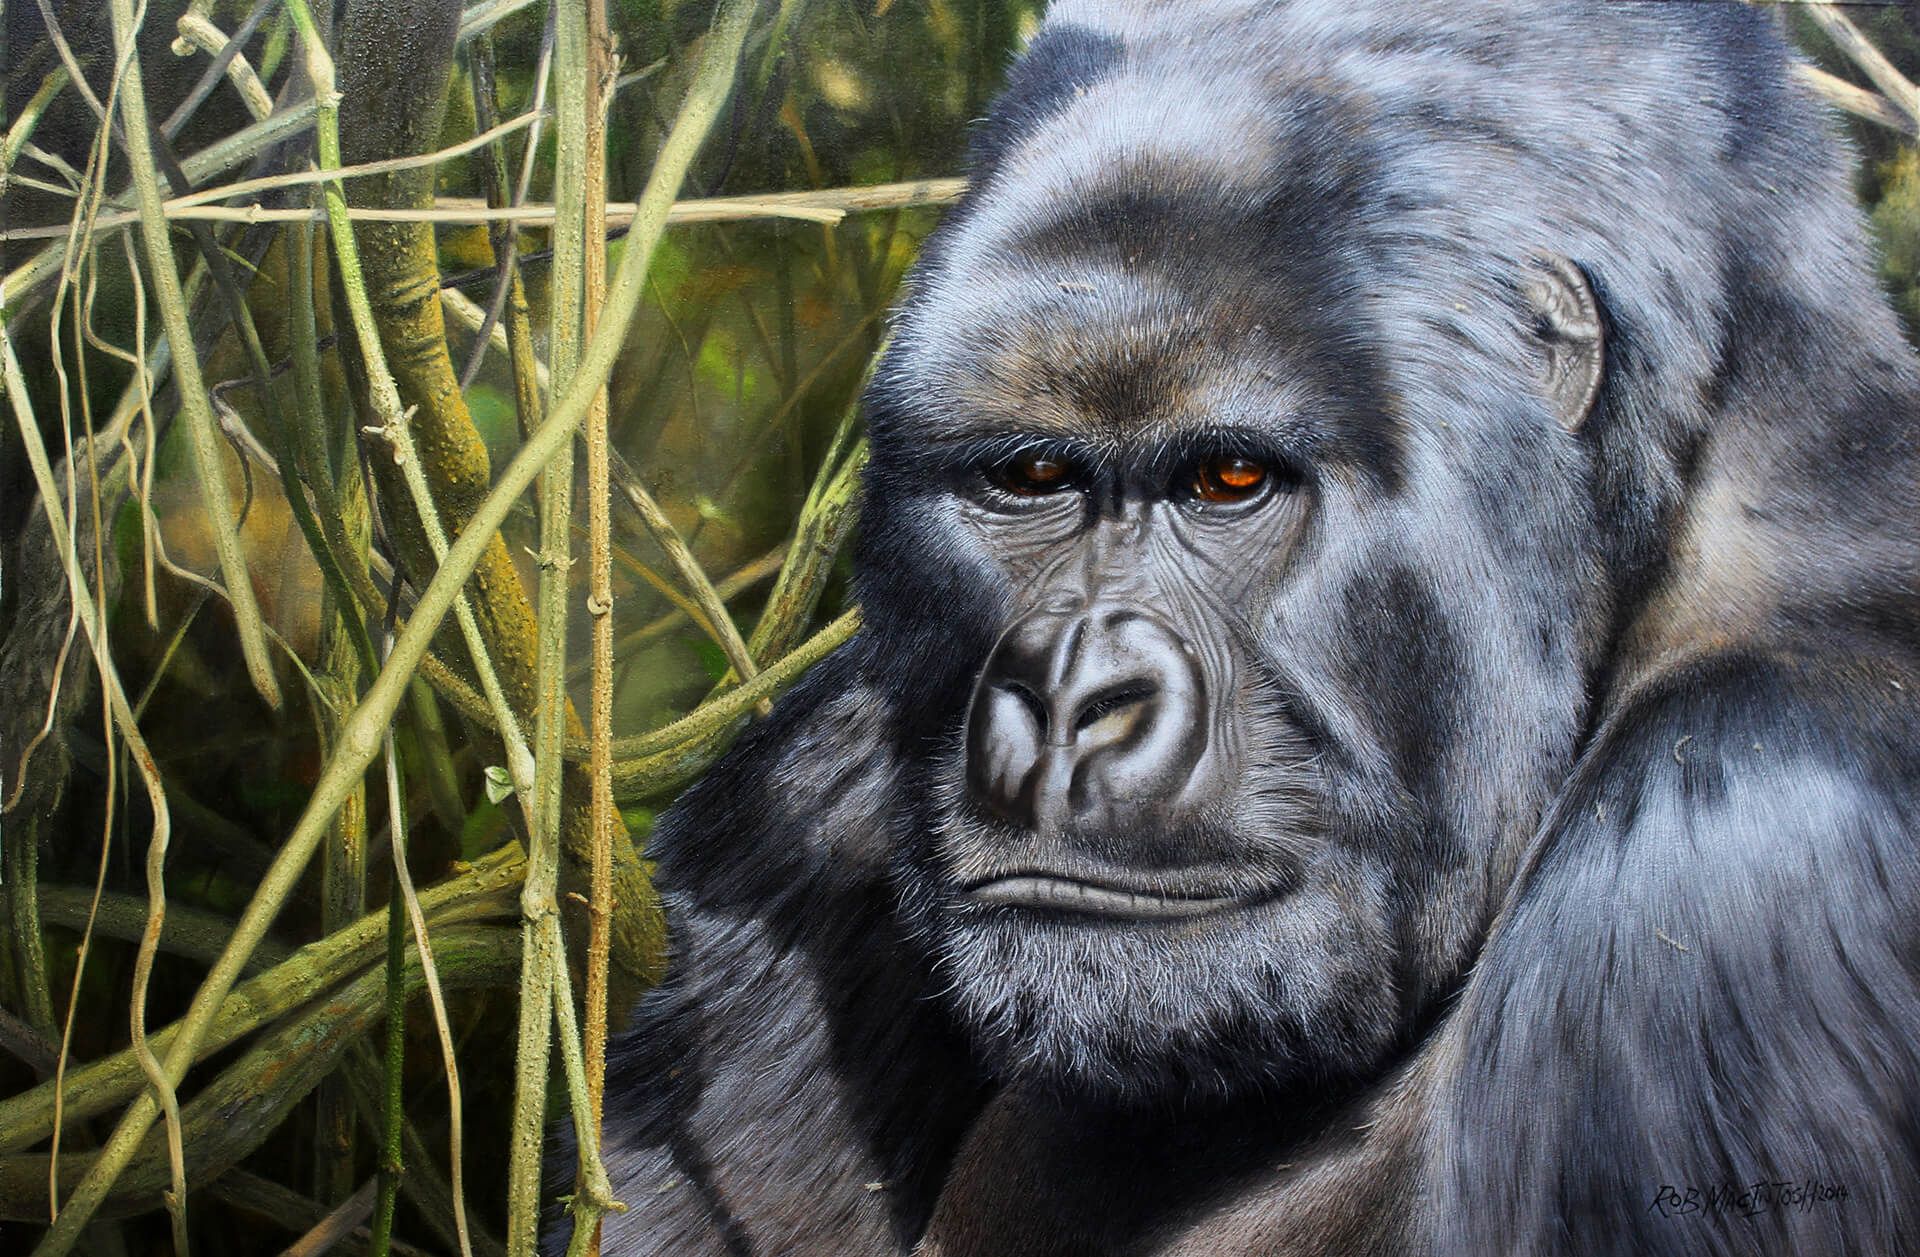 Photorealistic painting of a silverback gorilla